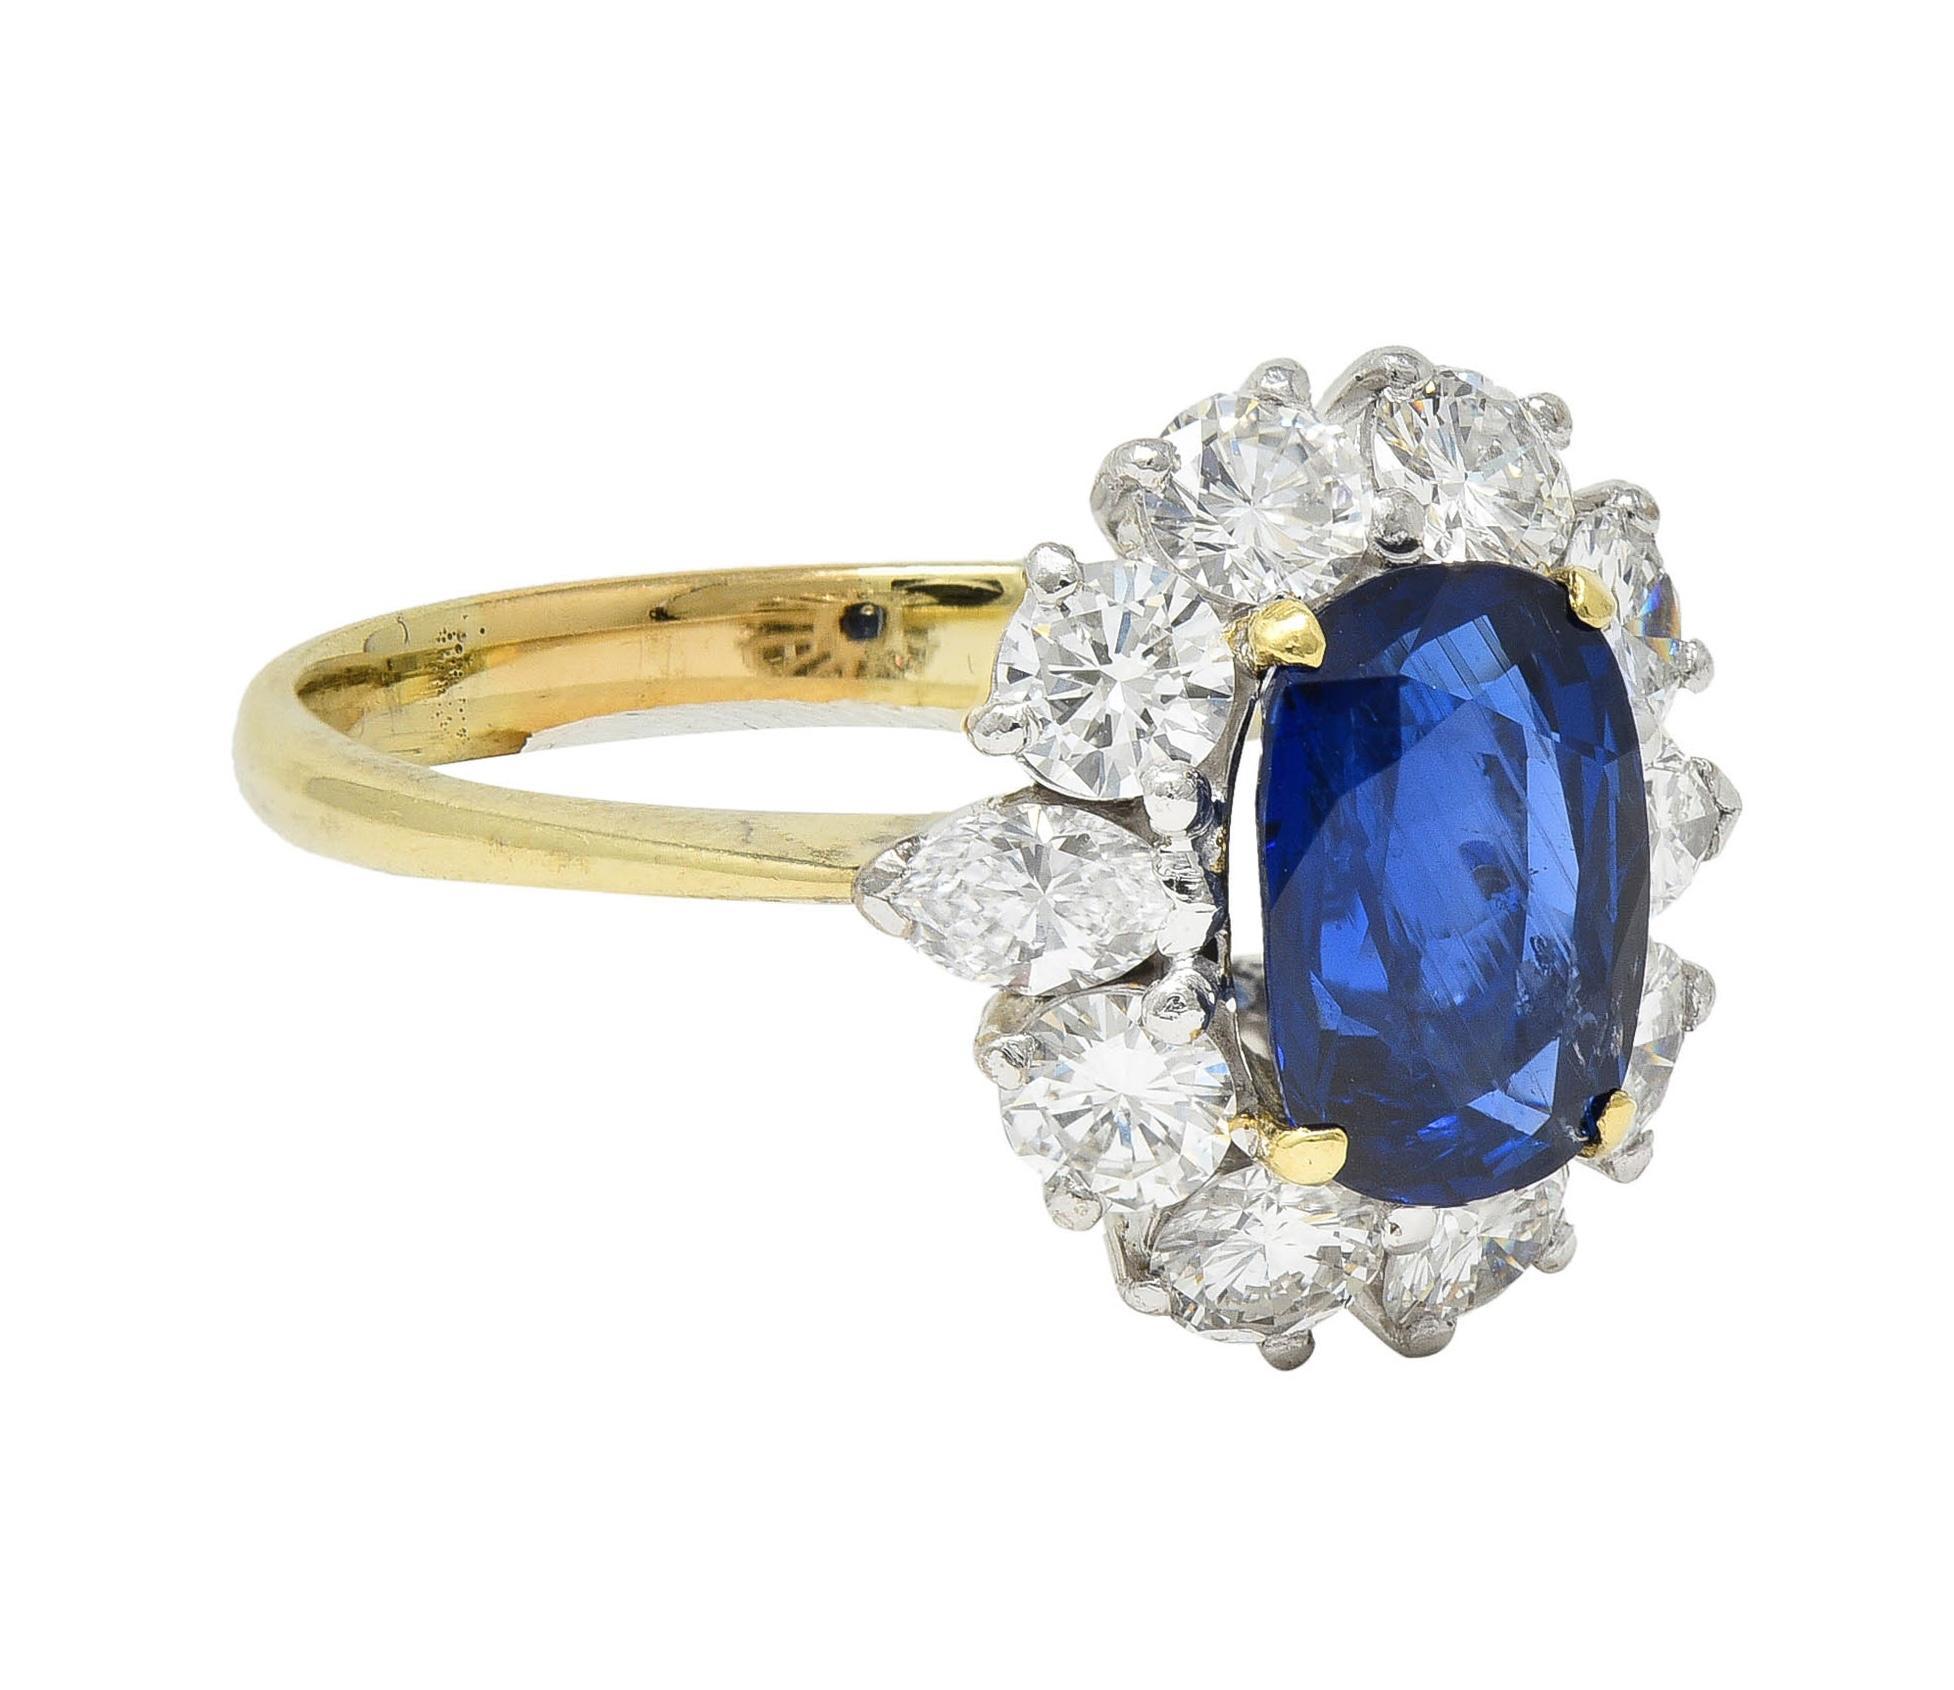 Centering a cushion cut sapphire weighing approximately 2.06 carats total - transparent deep blue 
Natural Burmese in origin with no indications of heat treatment 
Prong set in gold with a platinum halo surround of diamonds
Round brilliant and